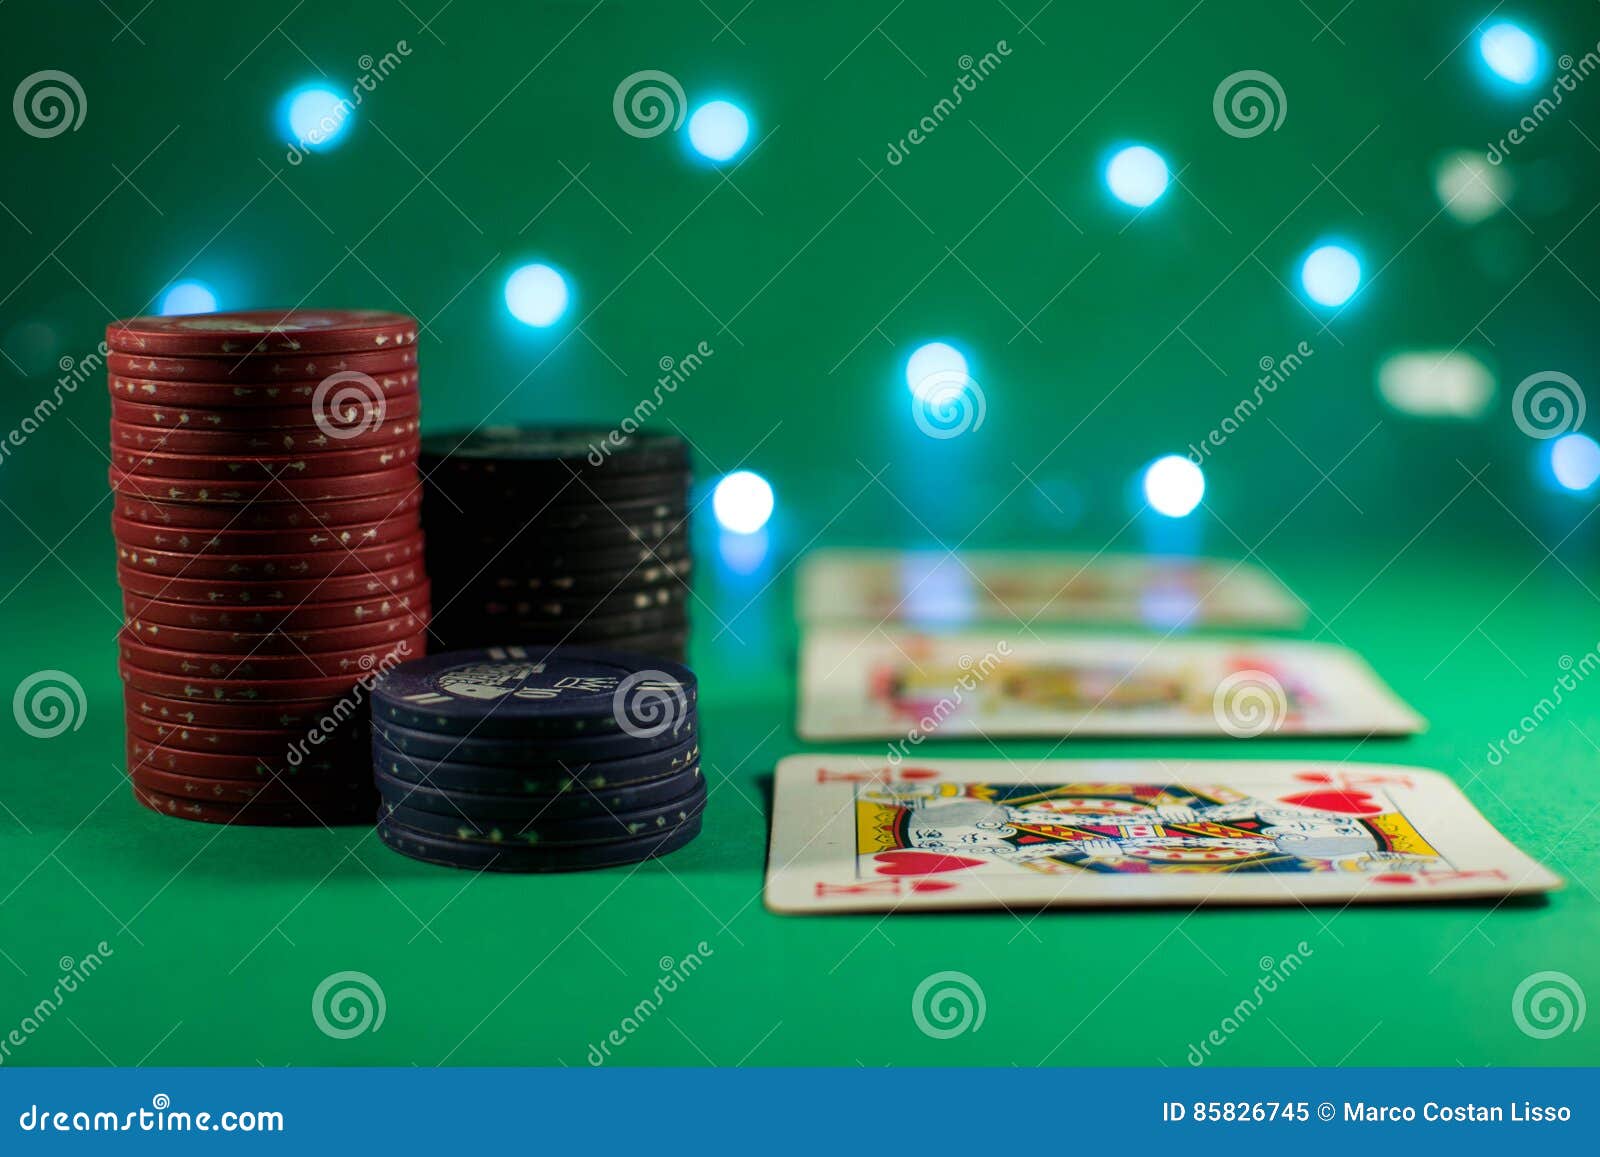 poker room with cards and chips